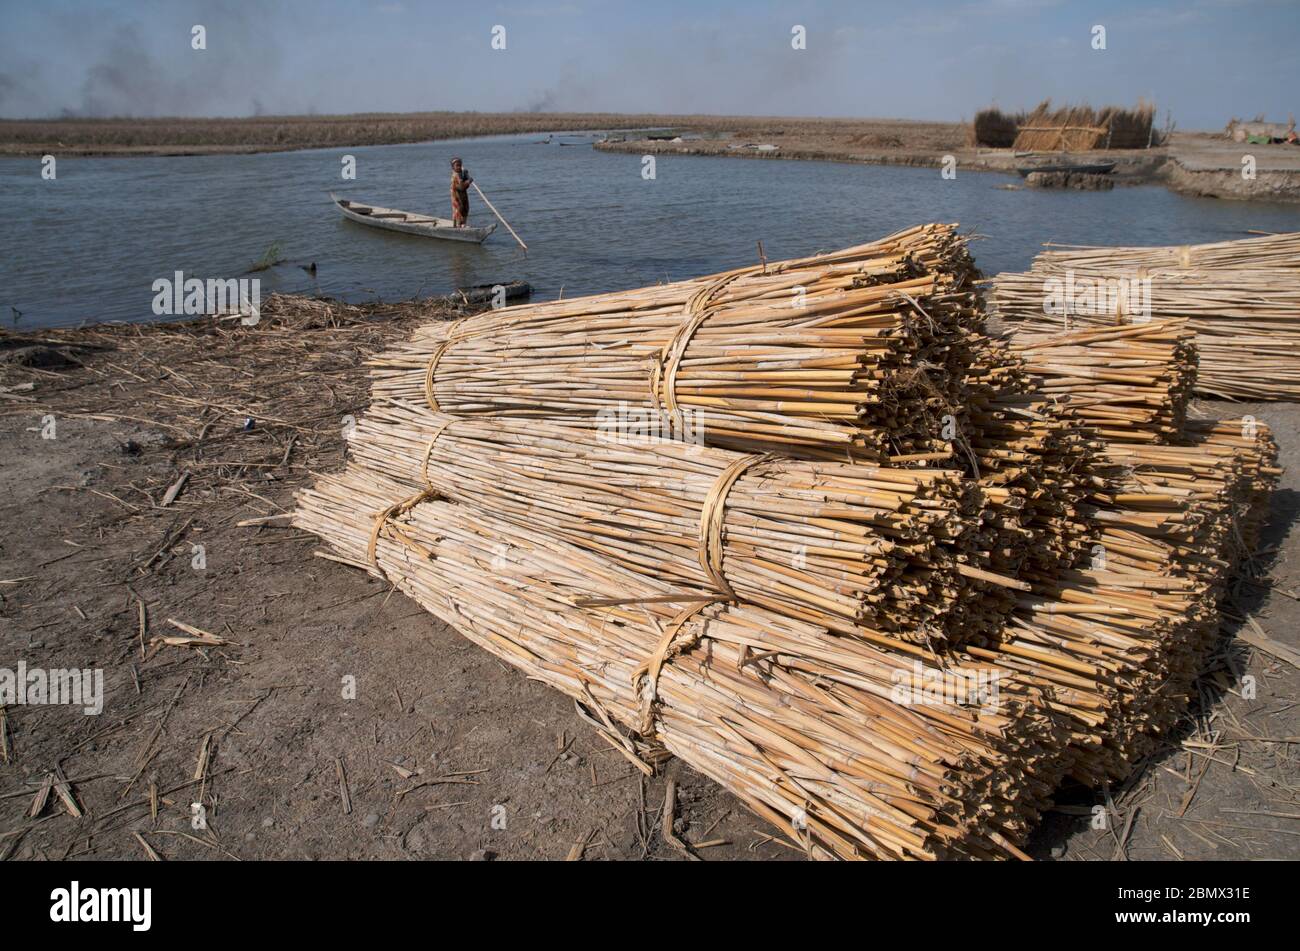 bundles of dried reeds for use in the building of Mudhifs in the marshes of Southern Iraq, by the Marsh Arabs Stock Photo